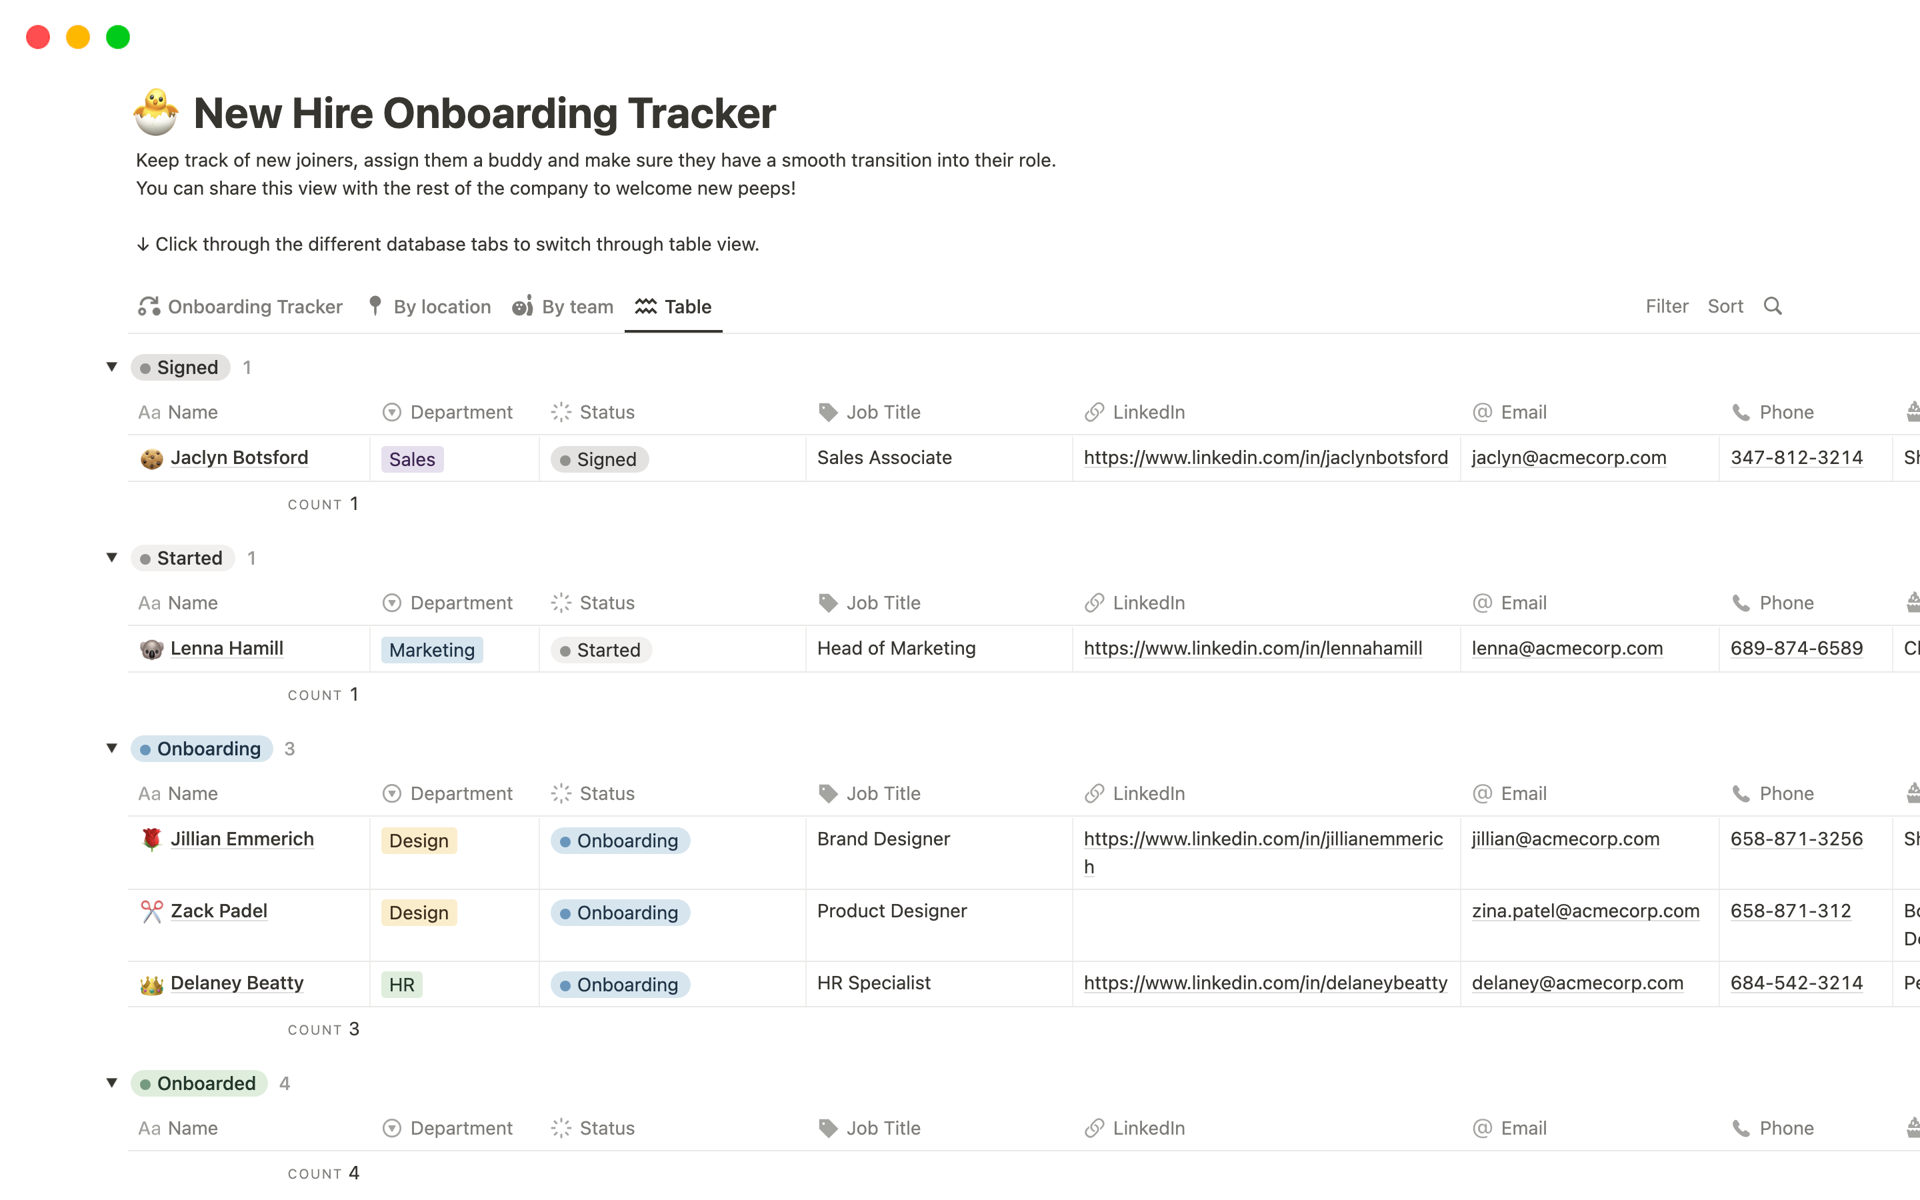 Monitor the onboarding of new hires.